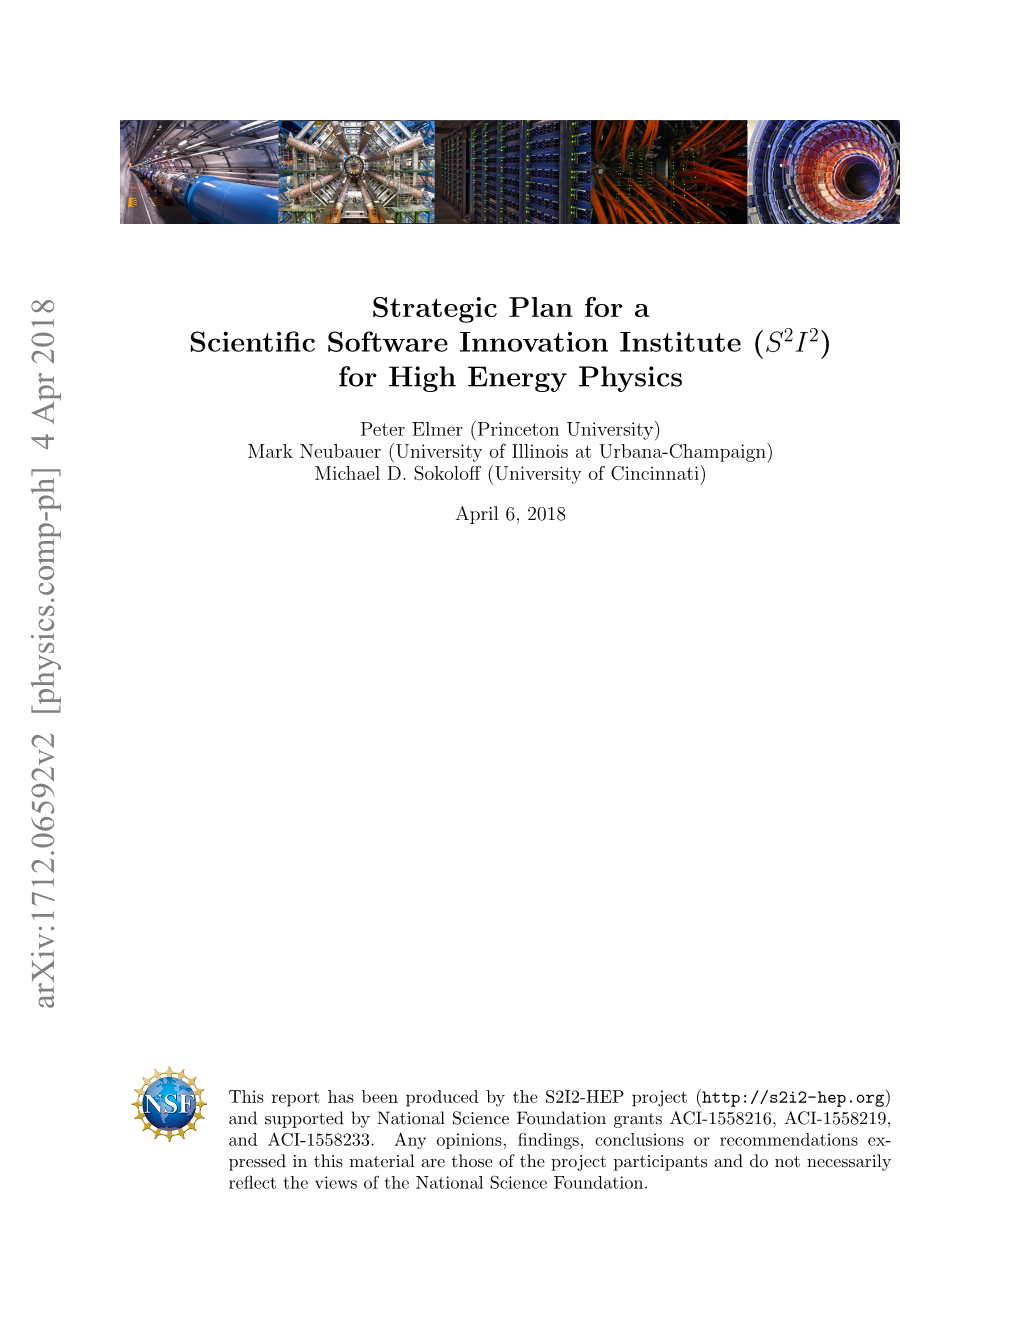 Strategic Plan for a Scientific Software Innovation Institute (S2I2) for High